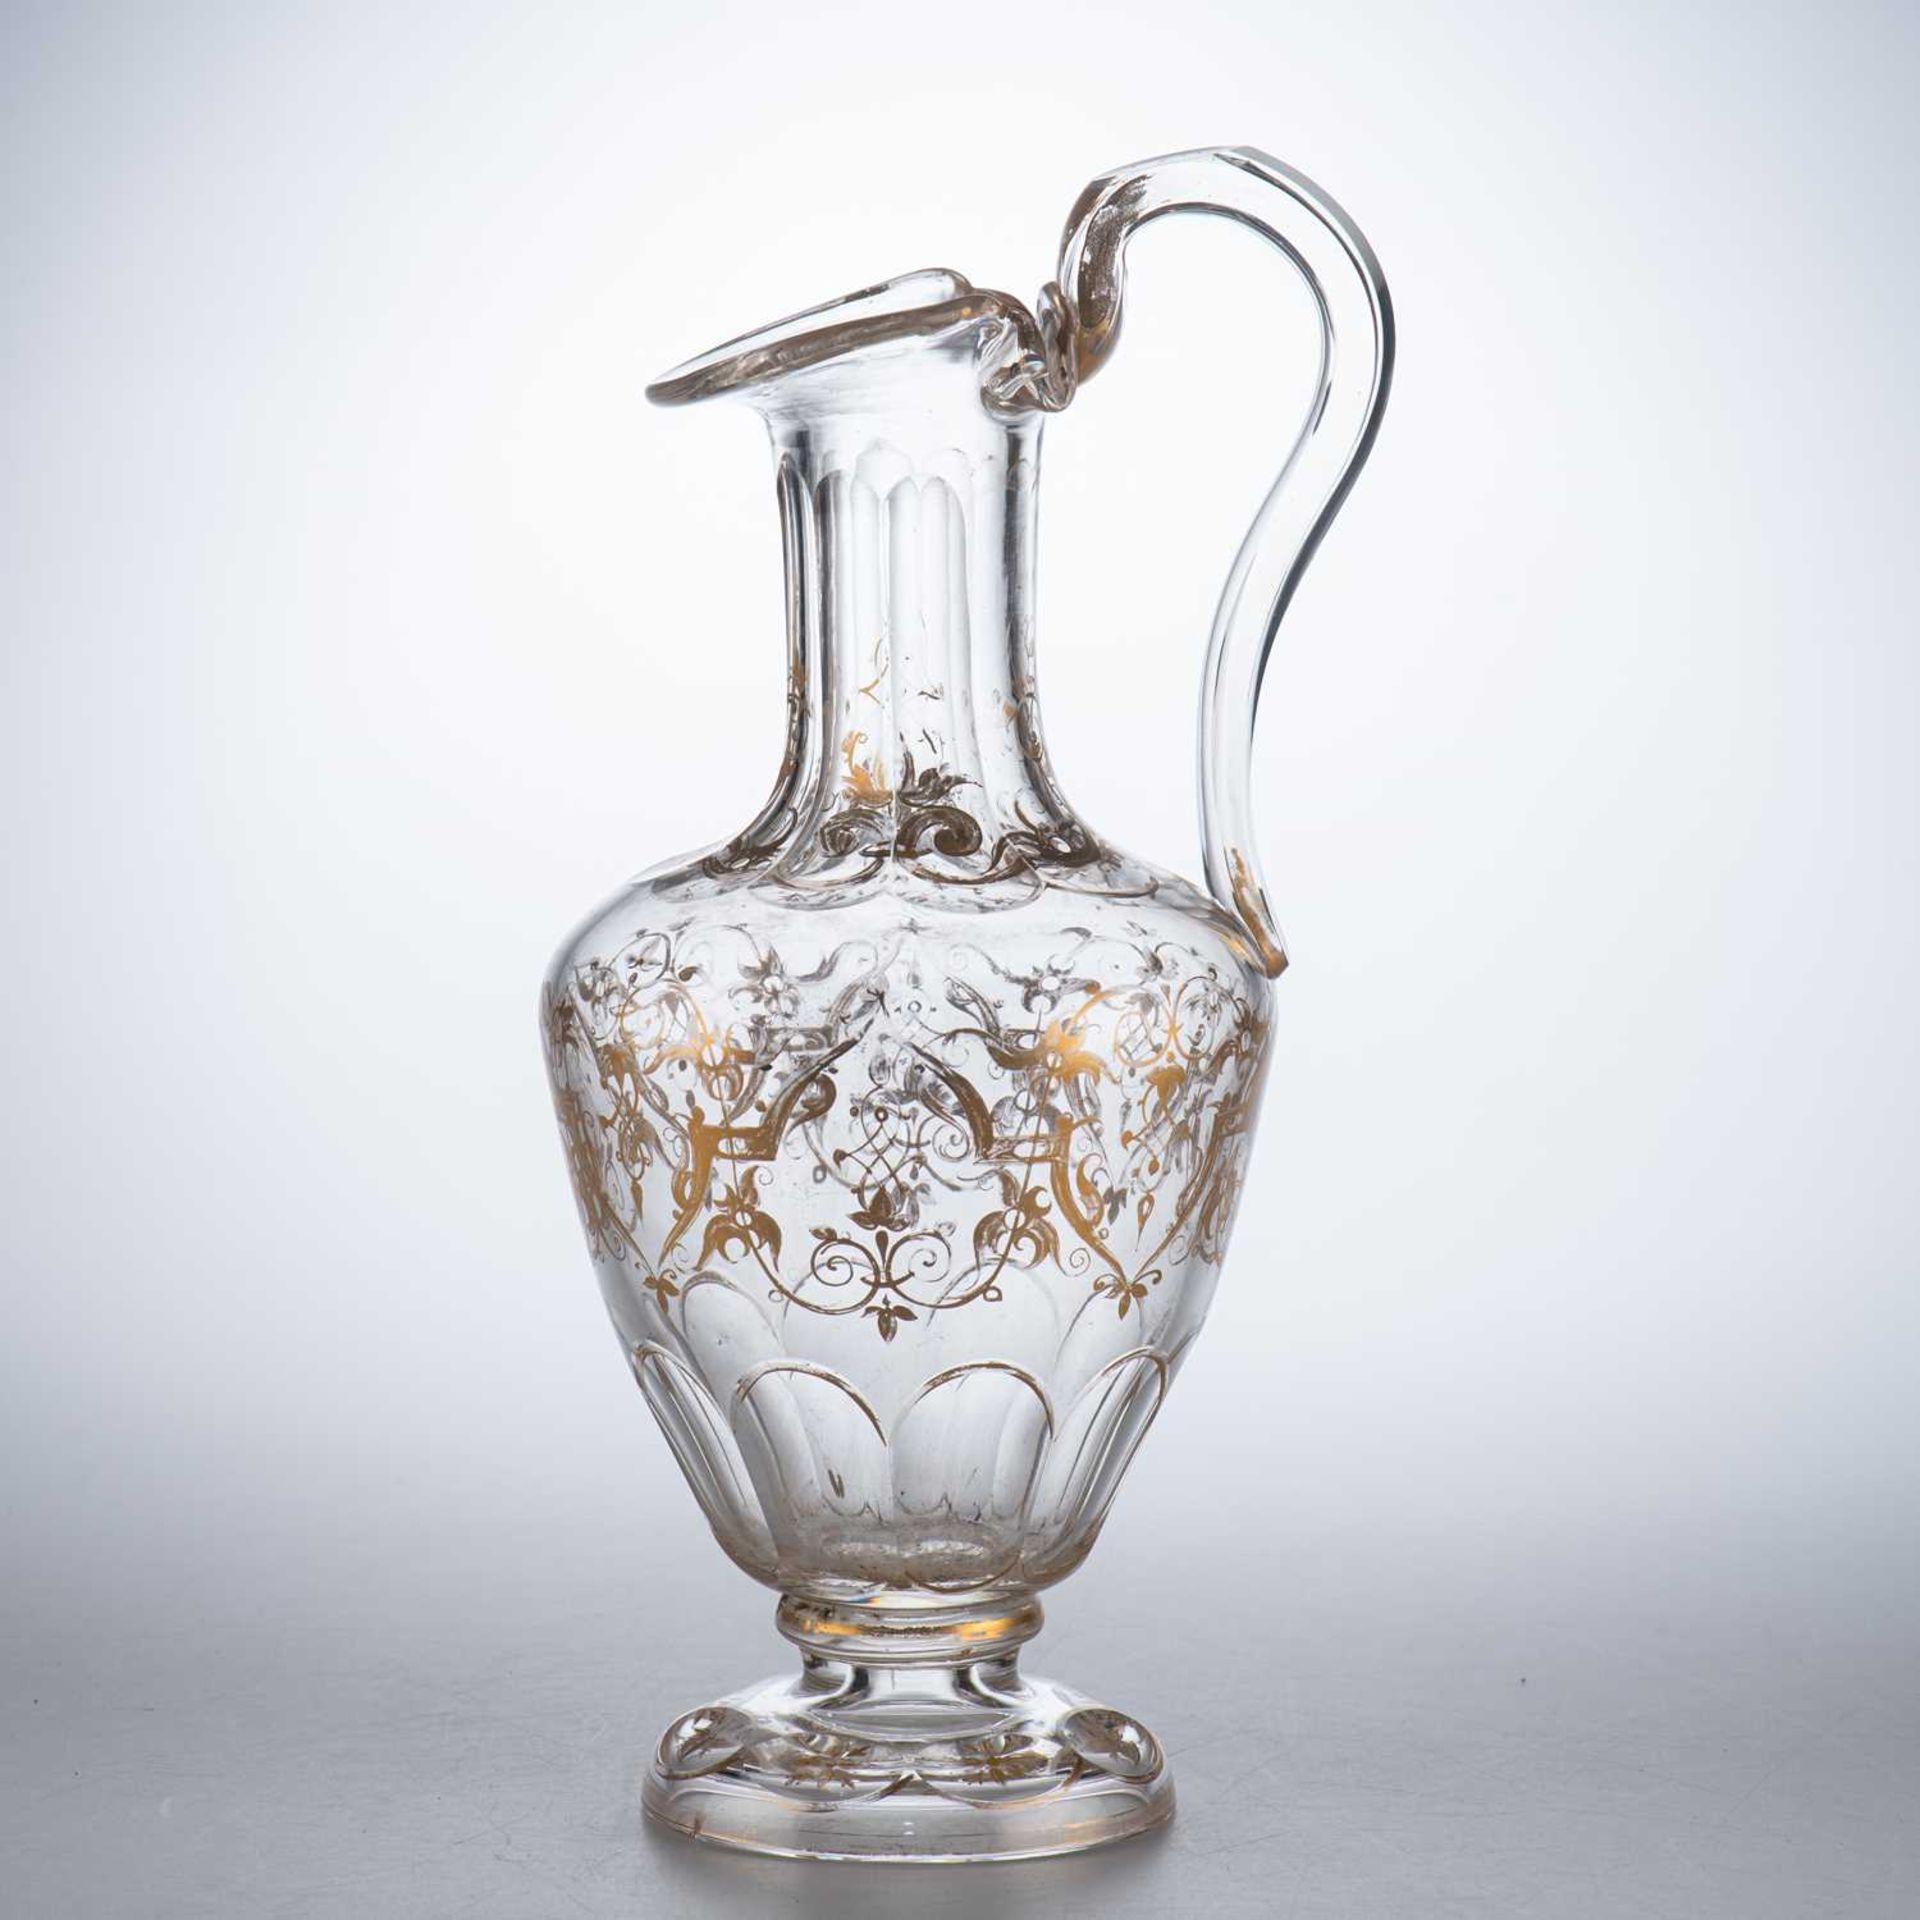 A LARGE GILDED GLASS EWER, PROBABLY BACCARAT, MID-19TH CENTURY